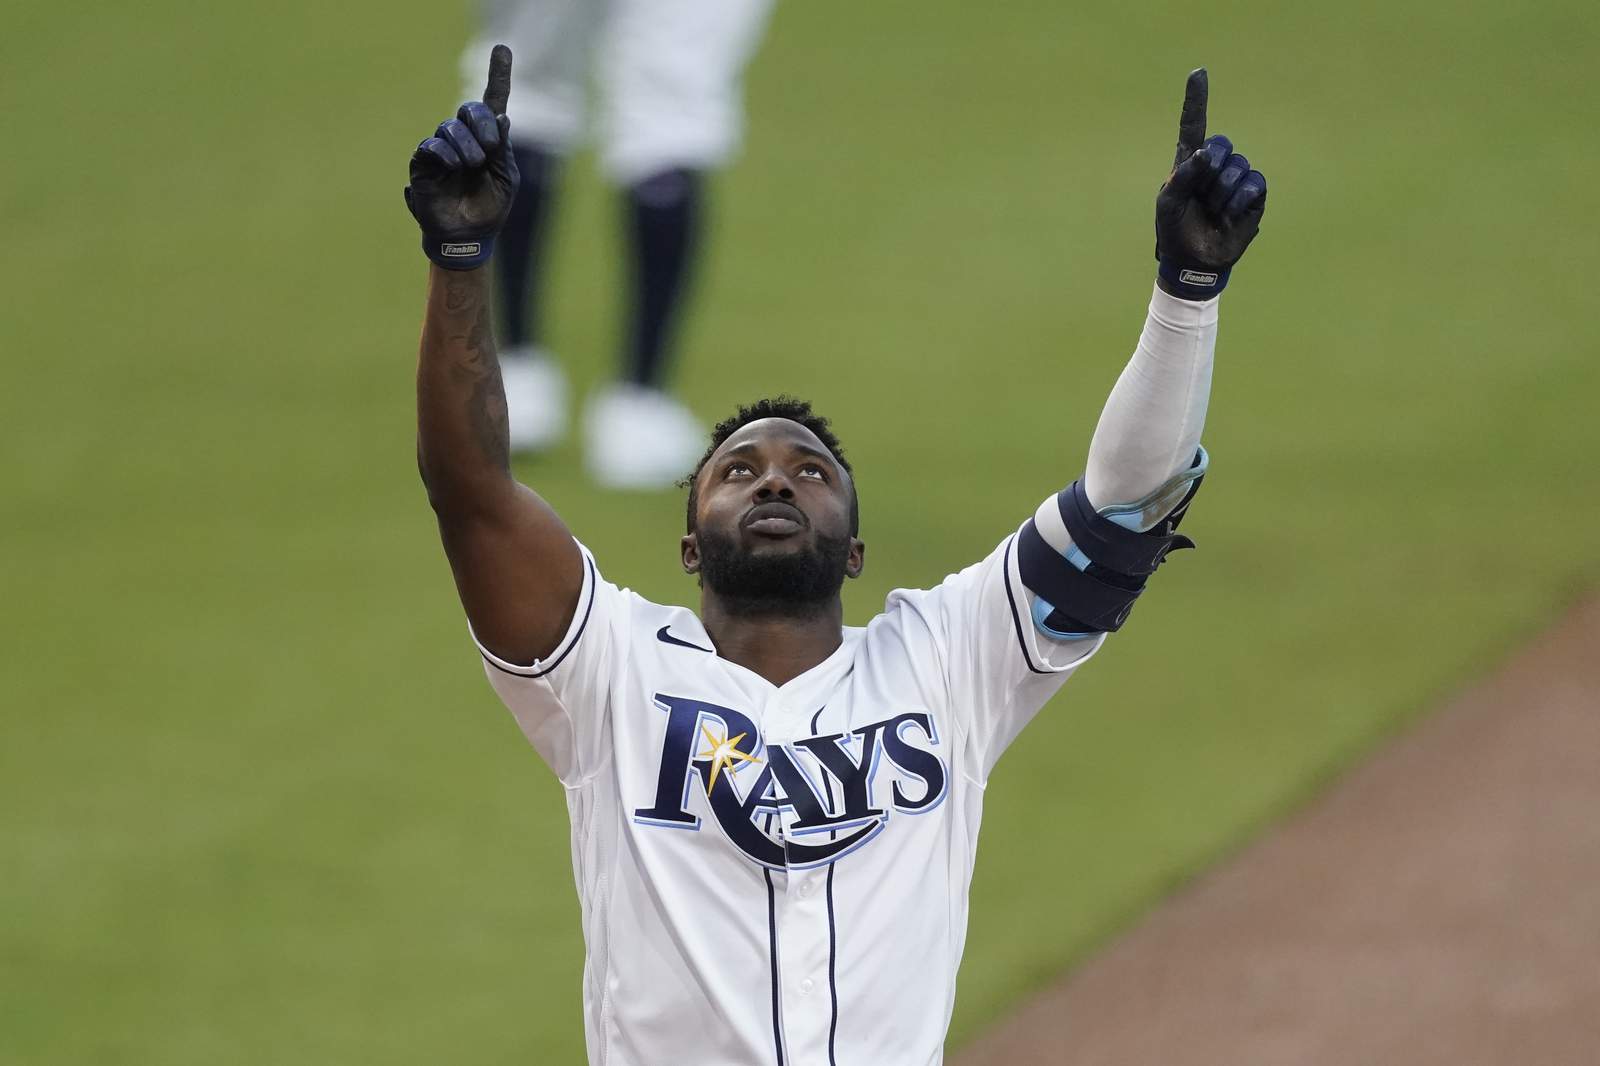 Arozarena, Rays top Astros 4-2 in Game 7, reach World Series